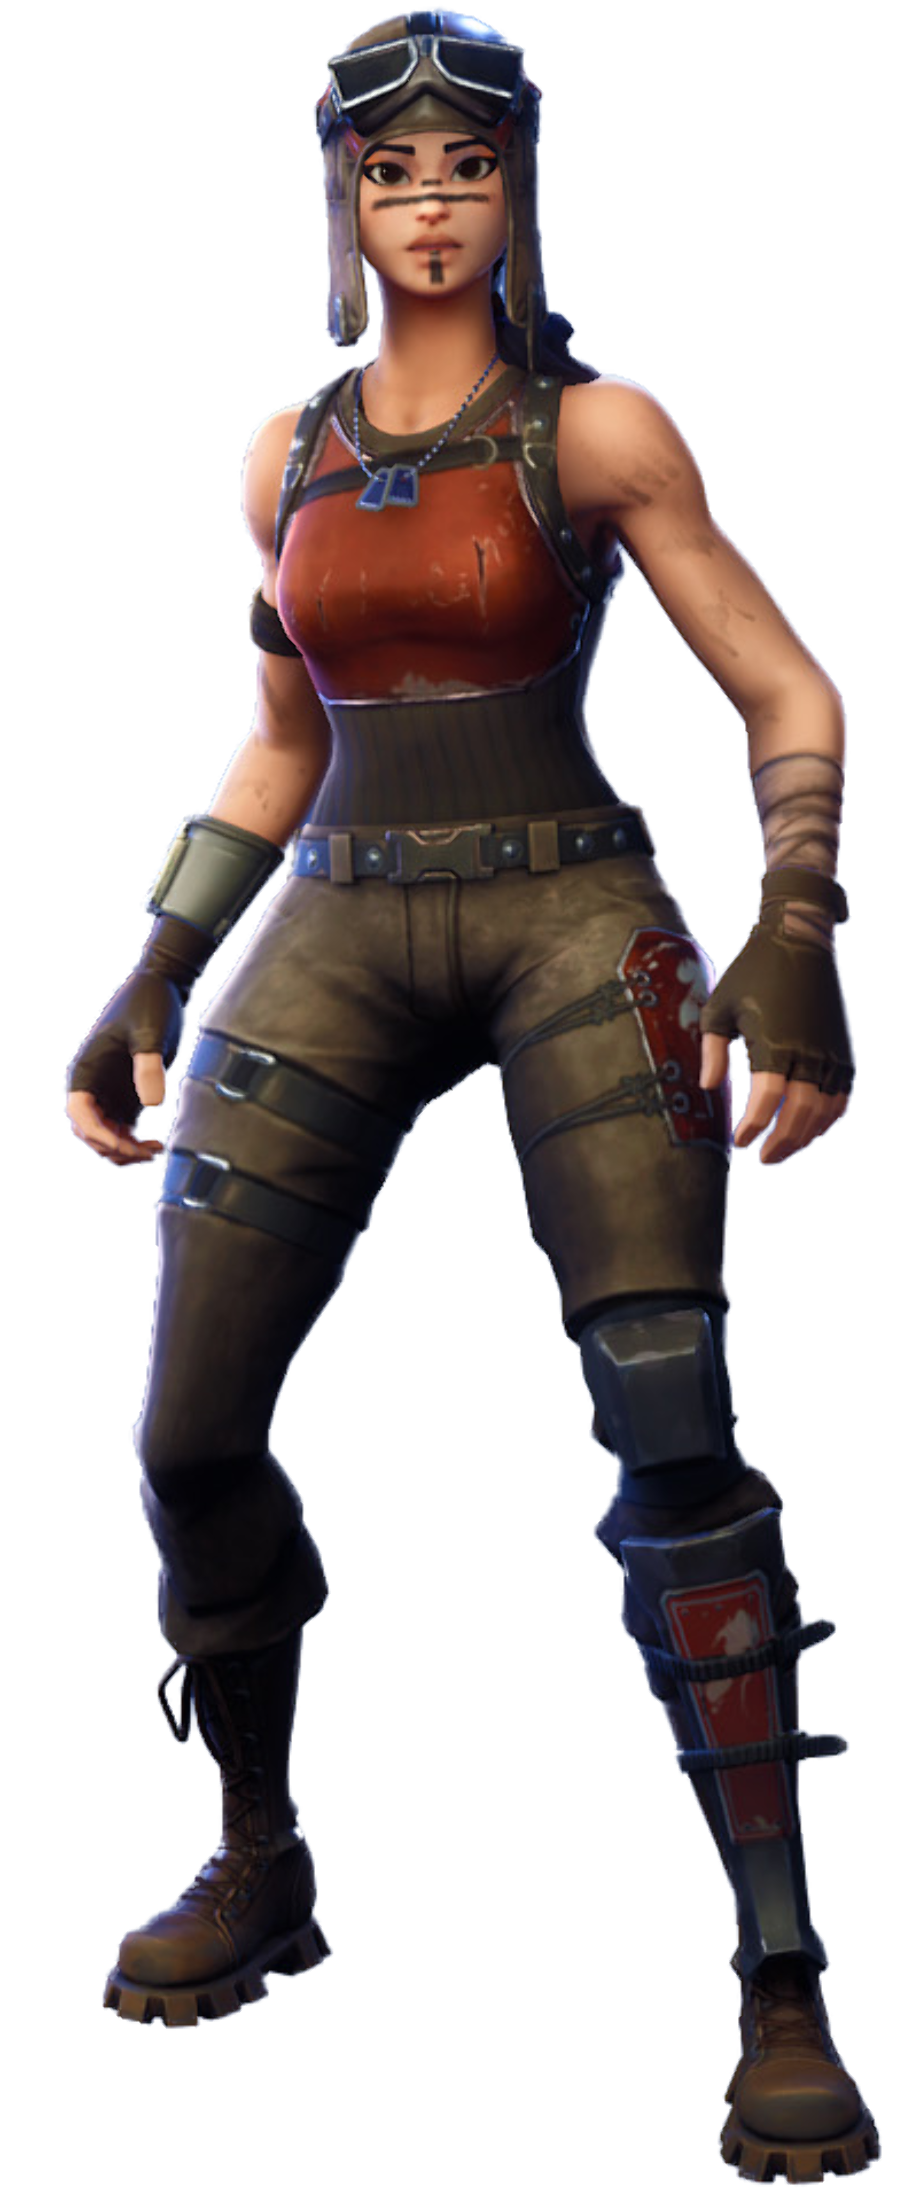 Download High Quality renegade raider clipart football ... - 920 x 2198 png 1042kB